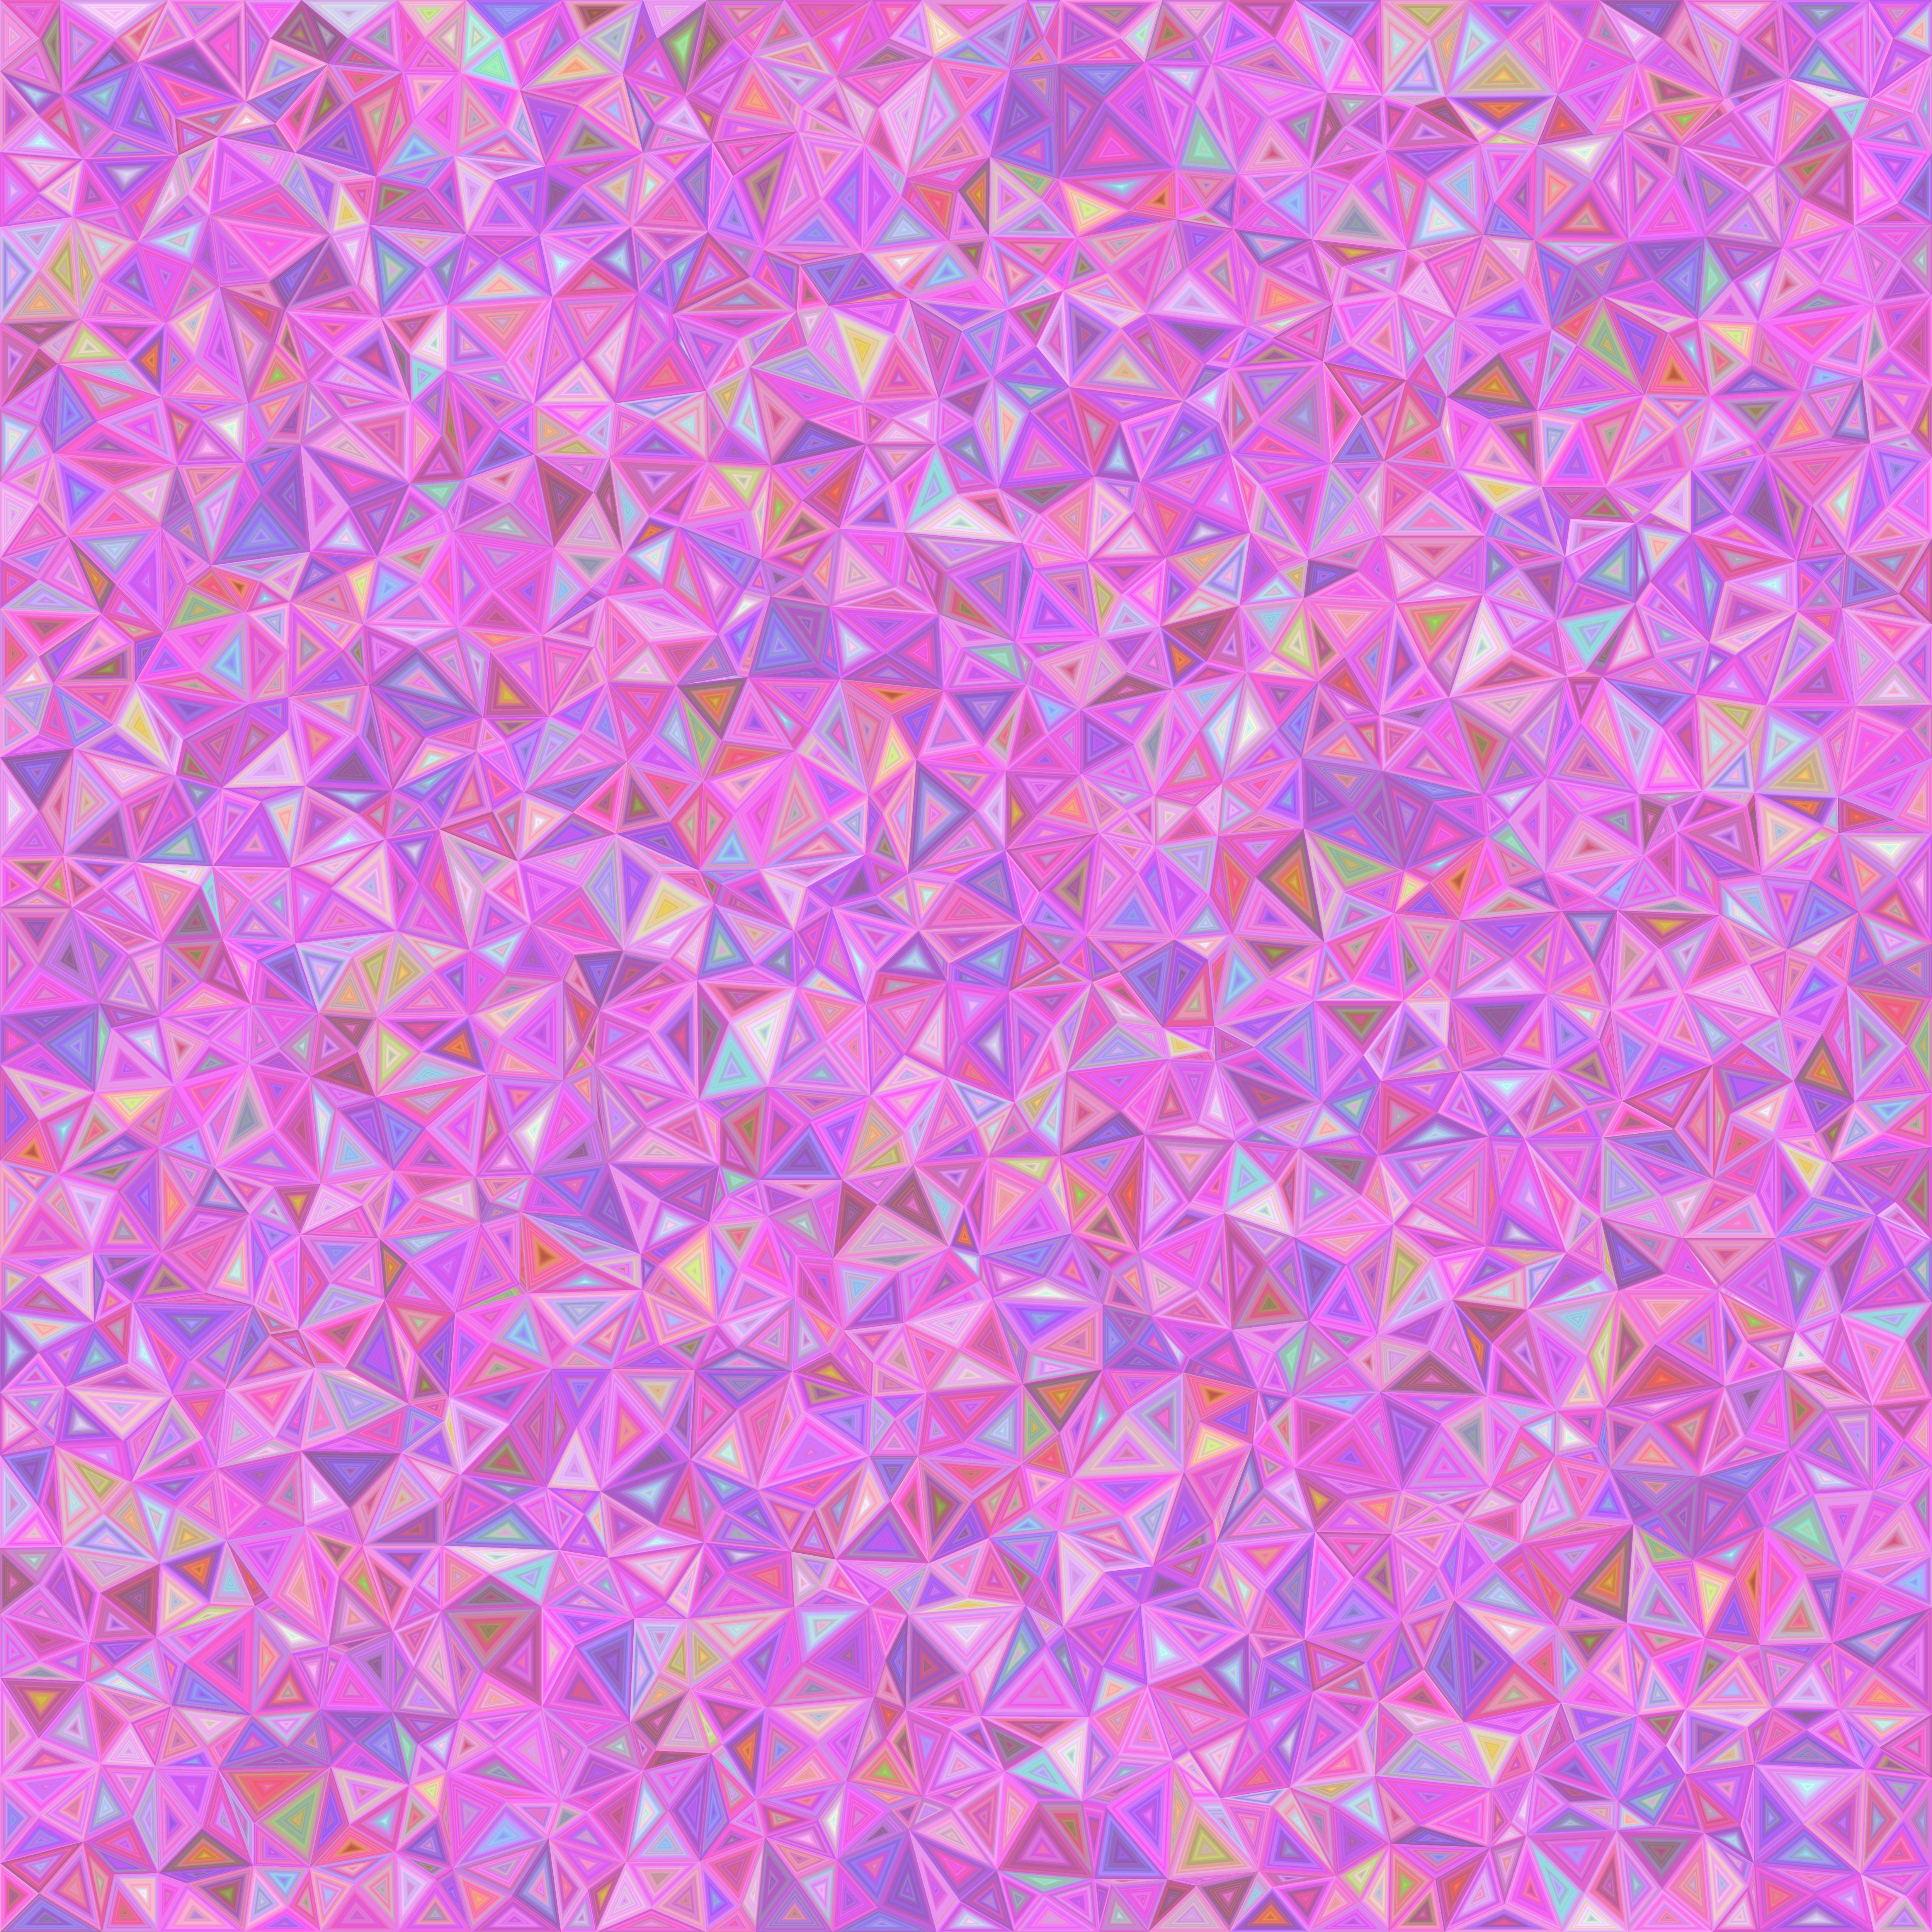 mosaic, texture, pink, textures, triangles, chaotic